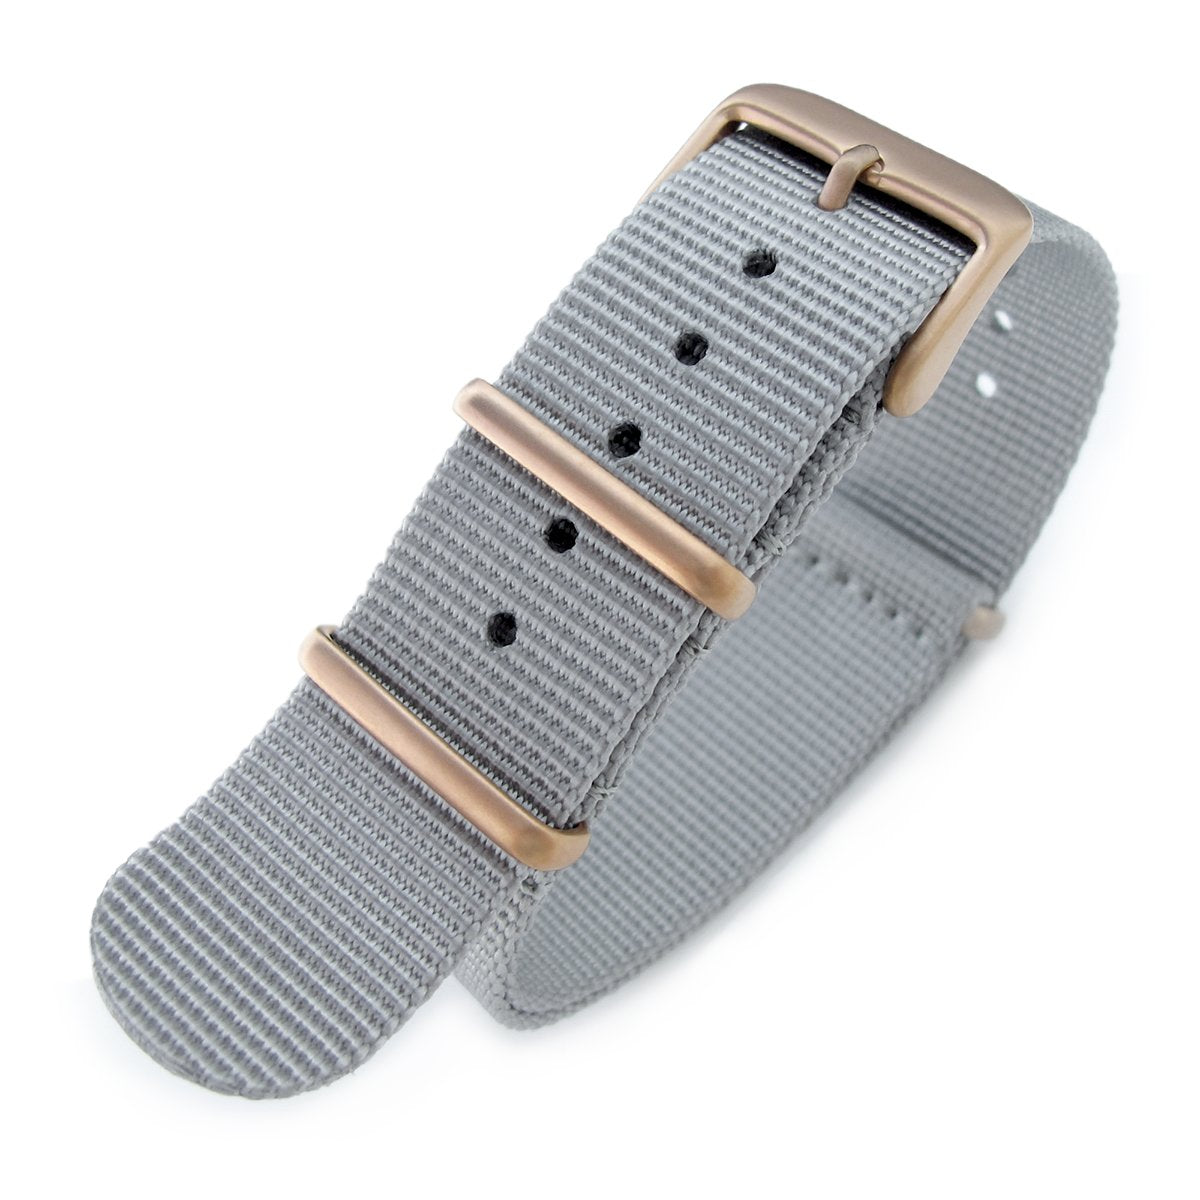 NATO 20mm G10 Military Watch Band Nylon Strap Military Grey IP Champagne 260mm Strapcode Watch Bands